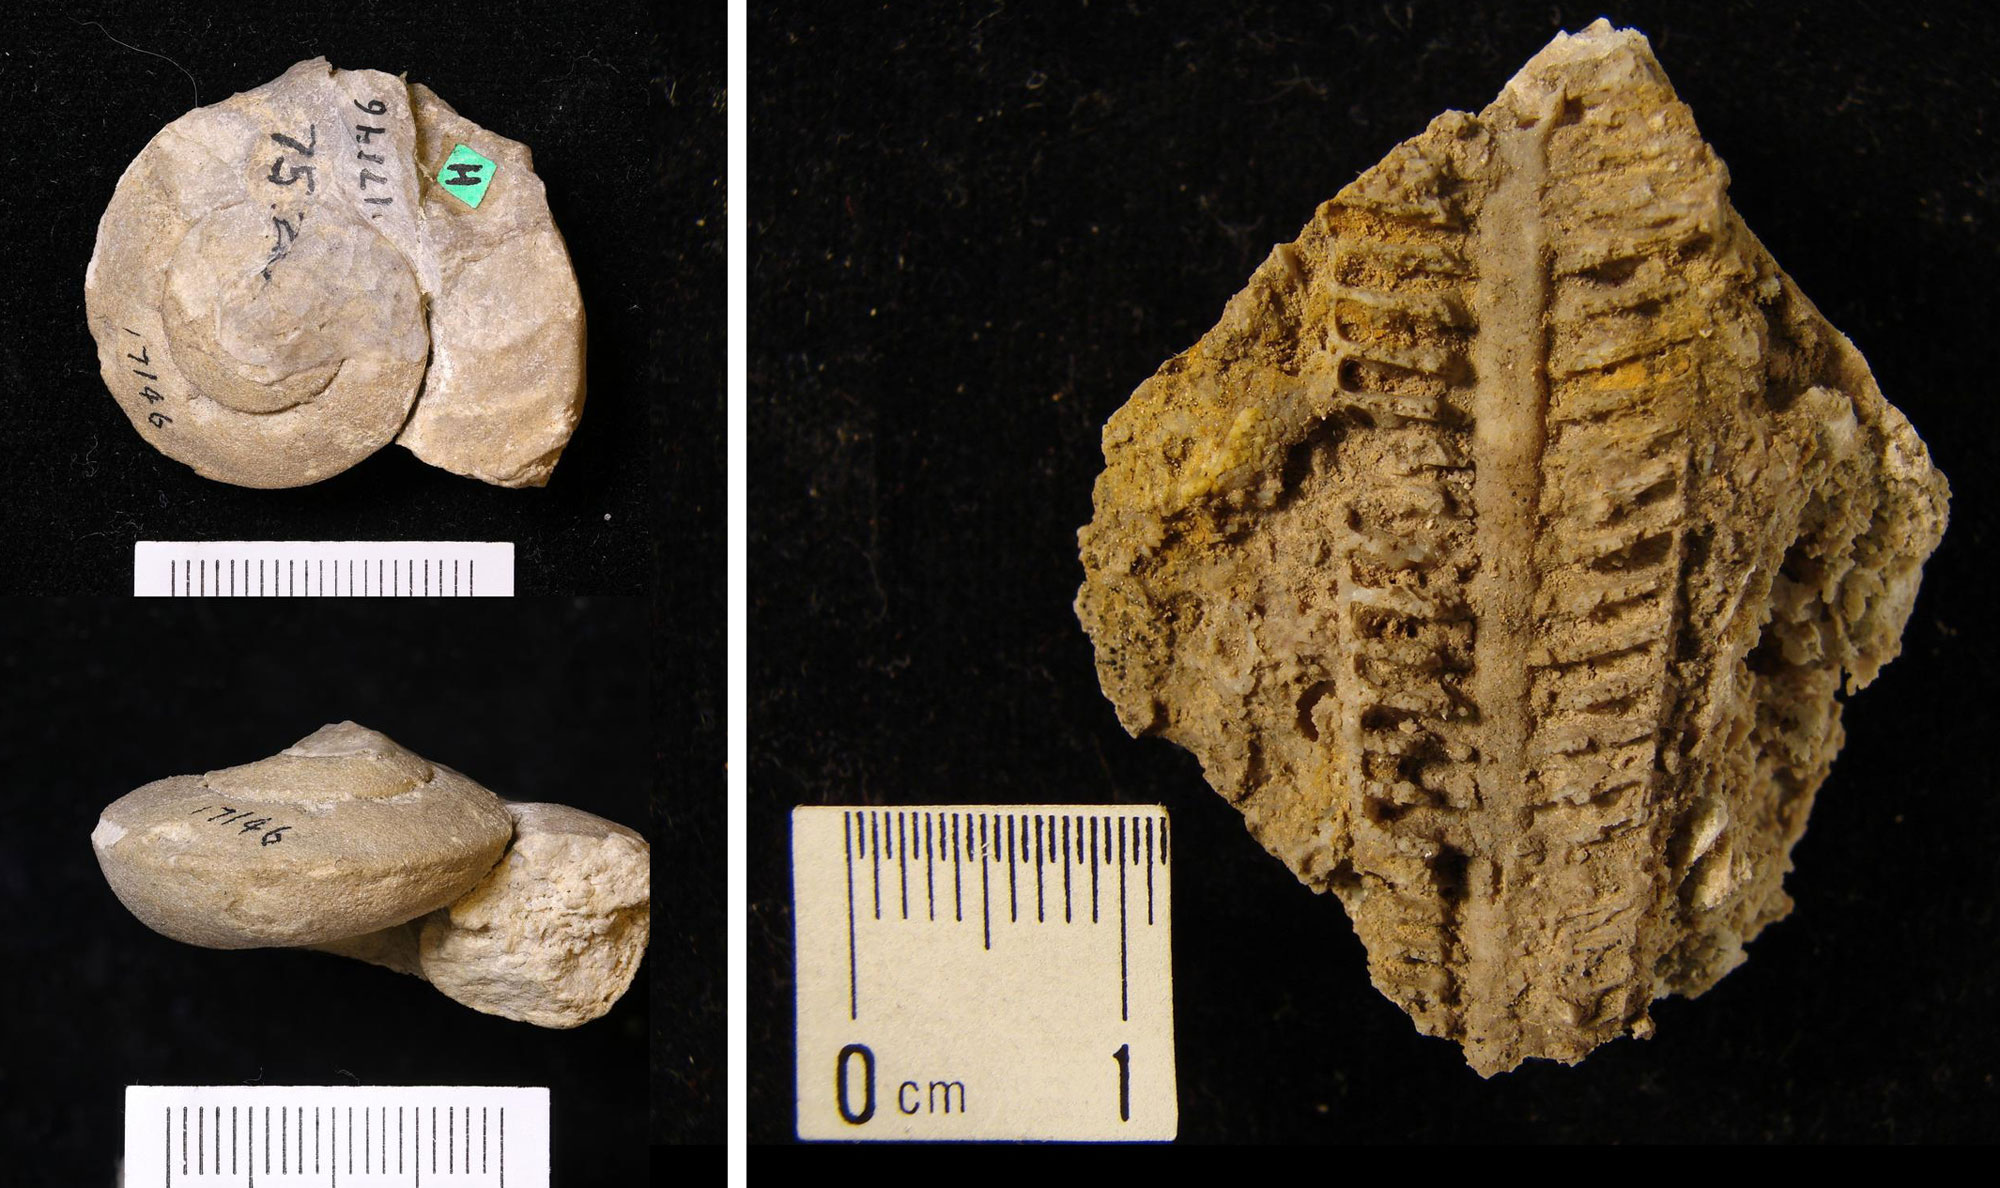 2-Panel image showing photos of Ordovician fossils from Missouri. Panel 1: Top and side views of a coiled snail shell. Panel 2: A straight cephalopod shell broken open to show chambers and siphuncle.